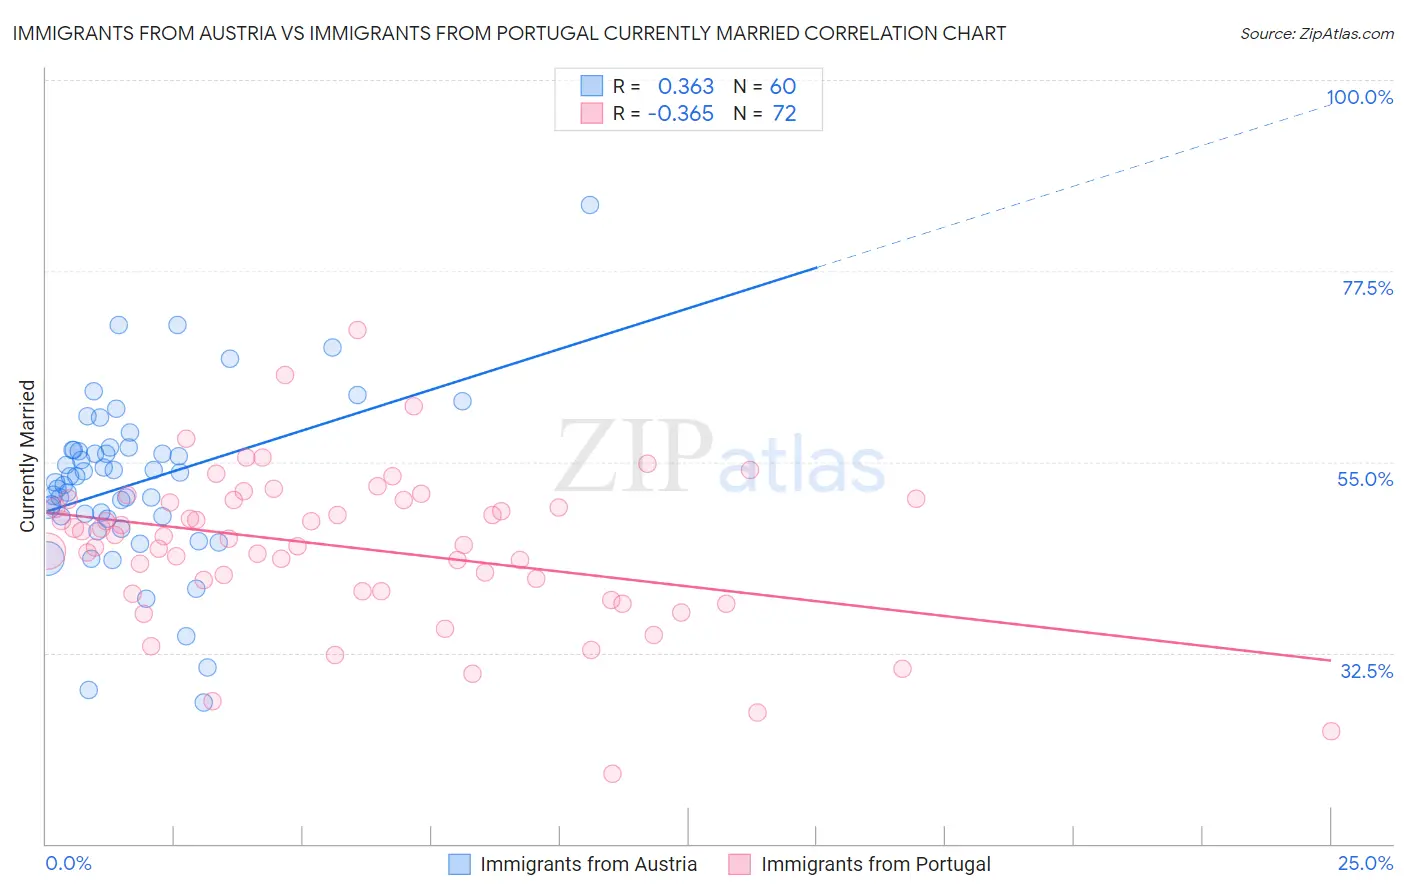 Immigrants from Austria vs Immigrants from Portugal Currently Married